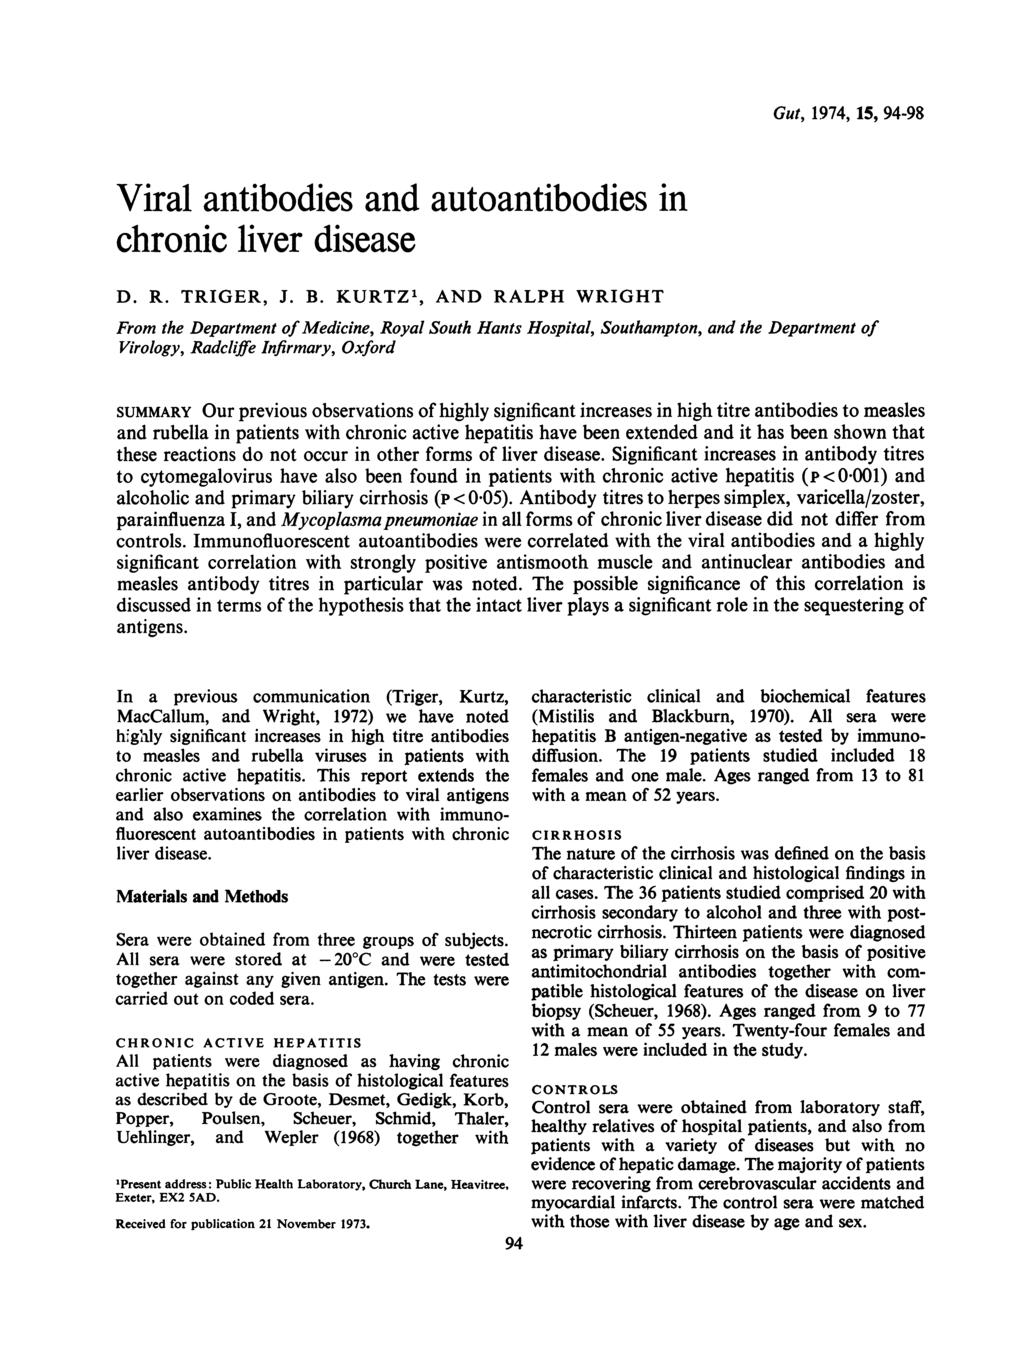 Viral antibodies and autoantibodies in chronic liver disease D. R. TRIGER, J. B.